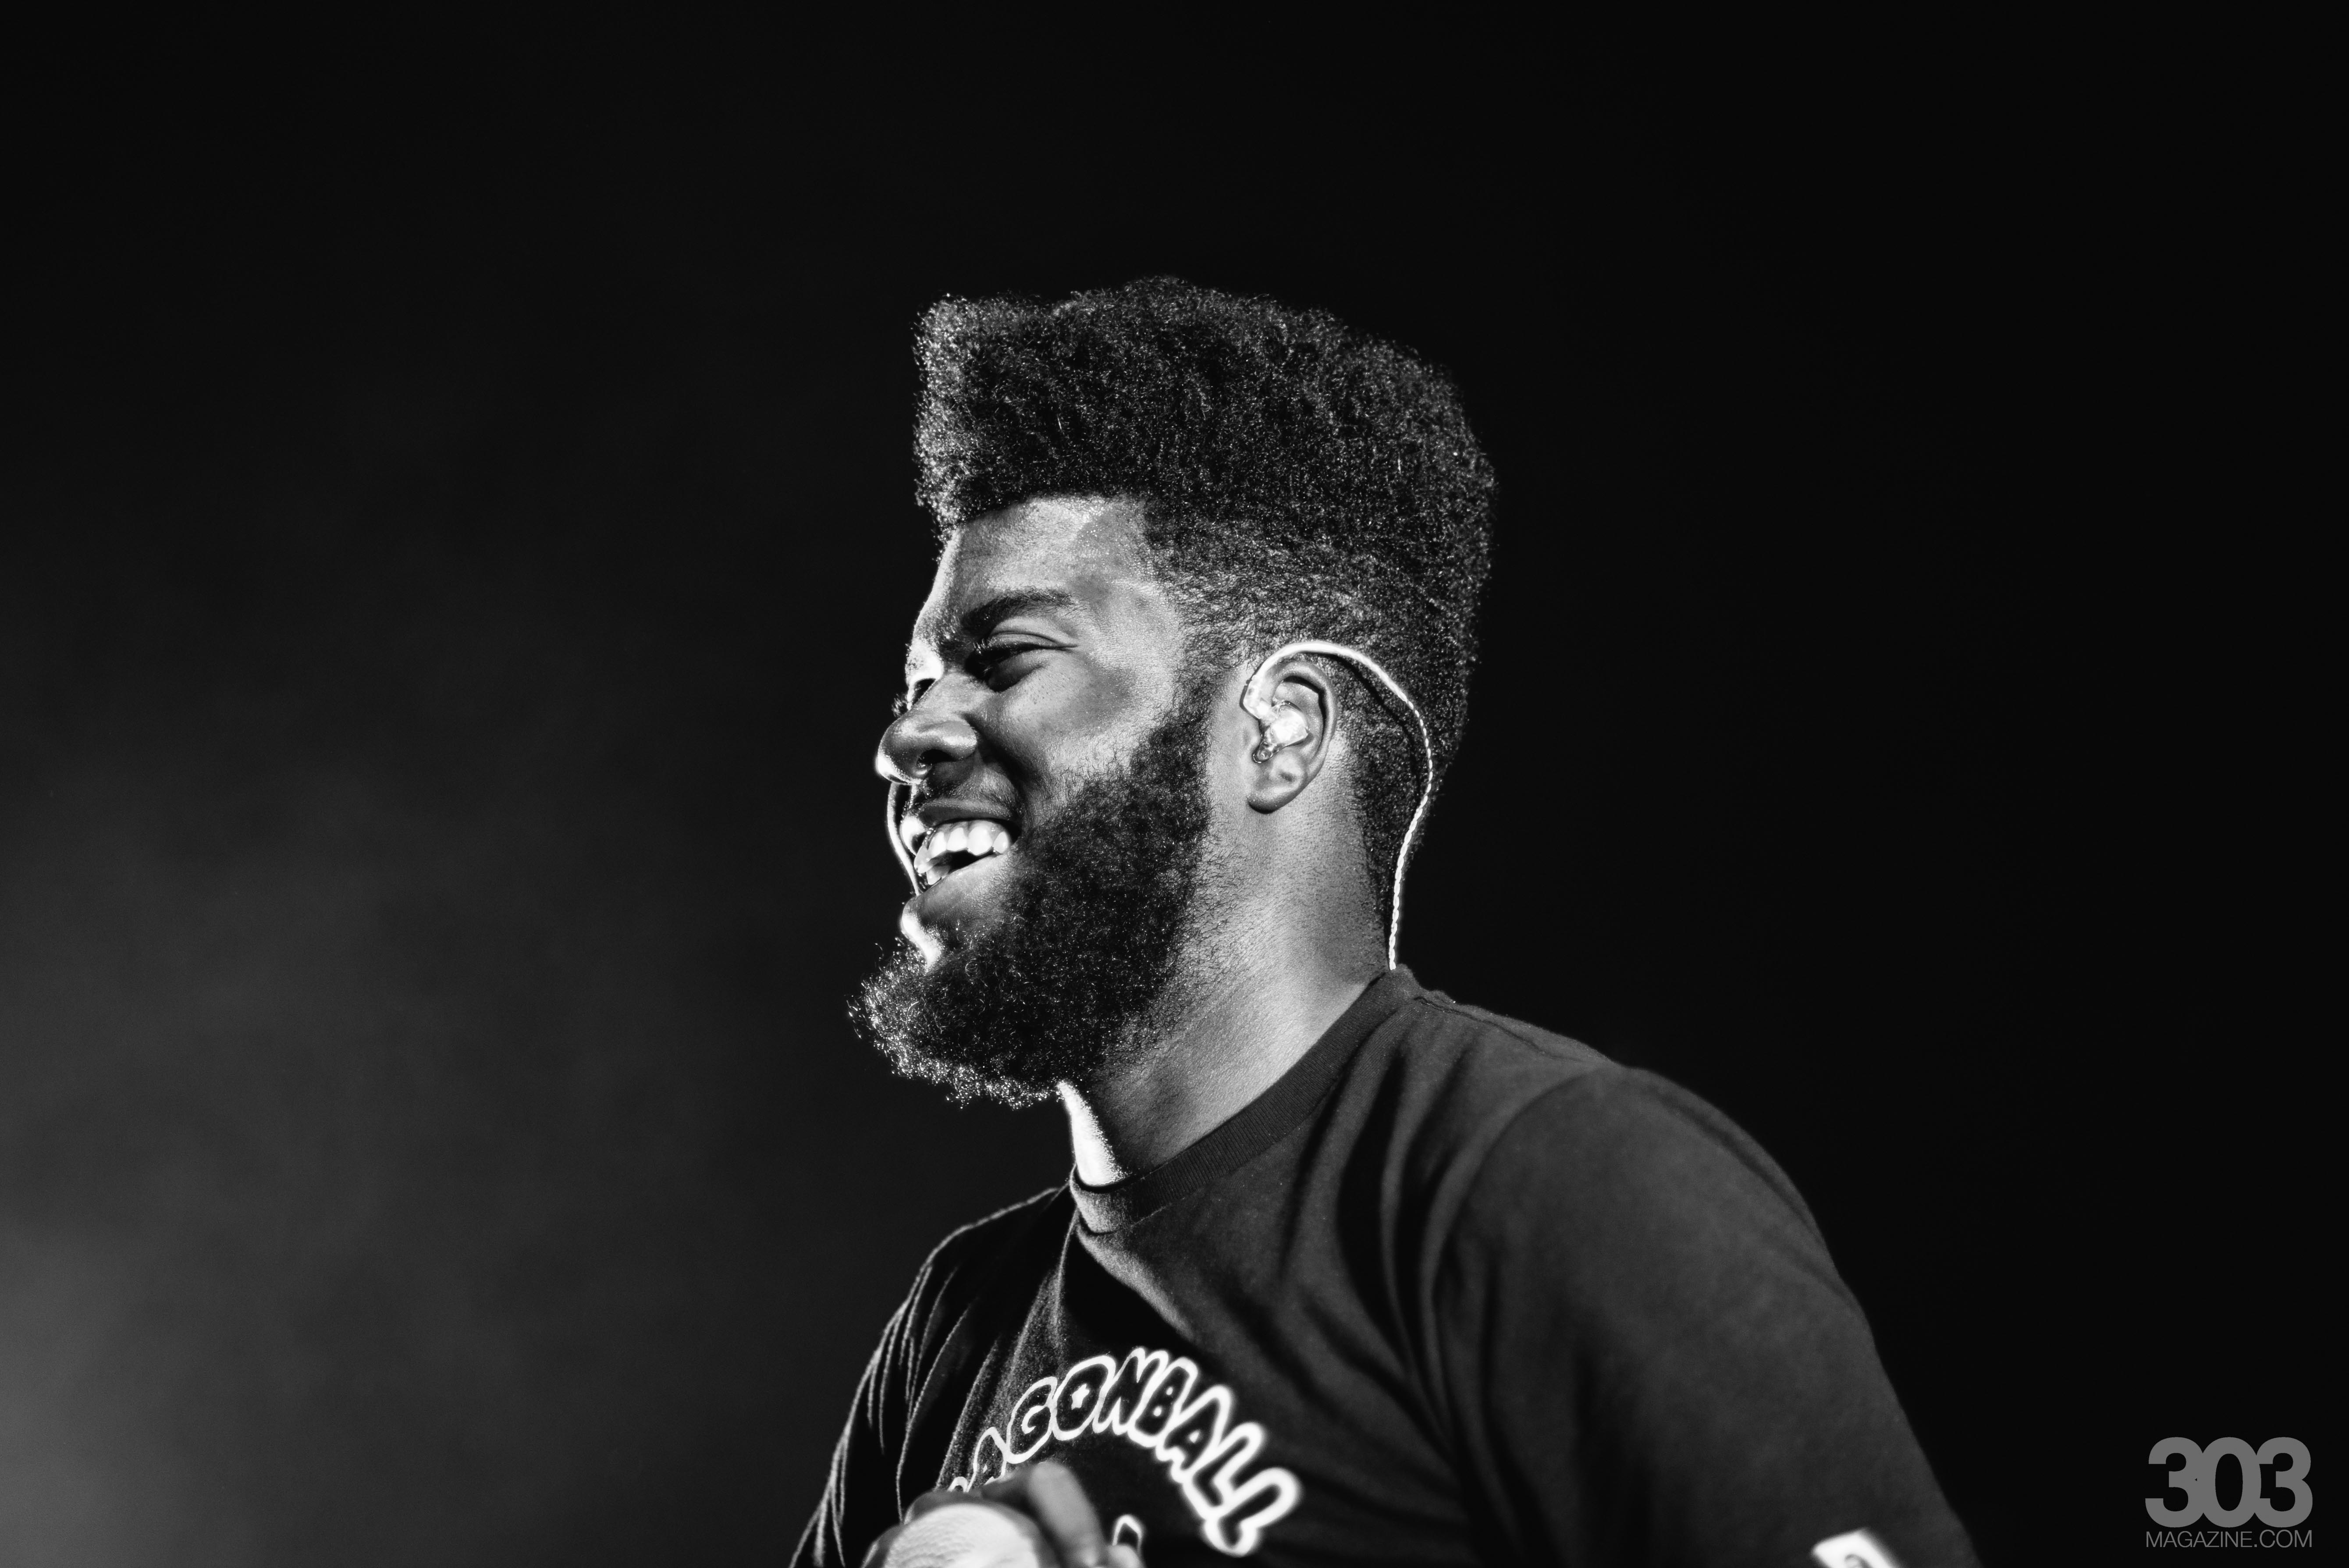 Khalid at The Fillmore by Alden Bonecutter